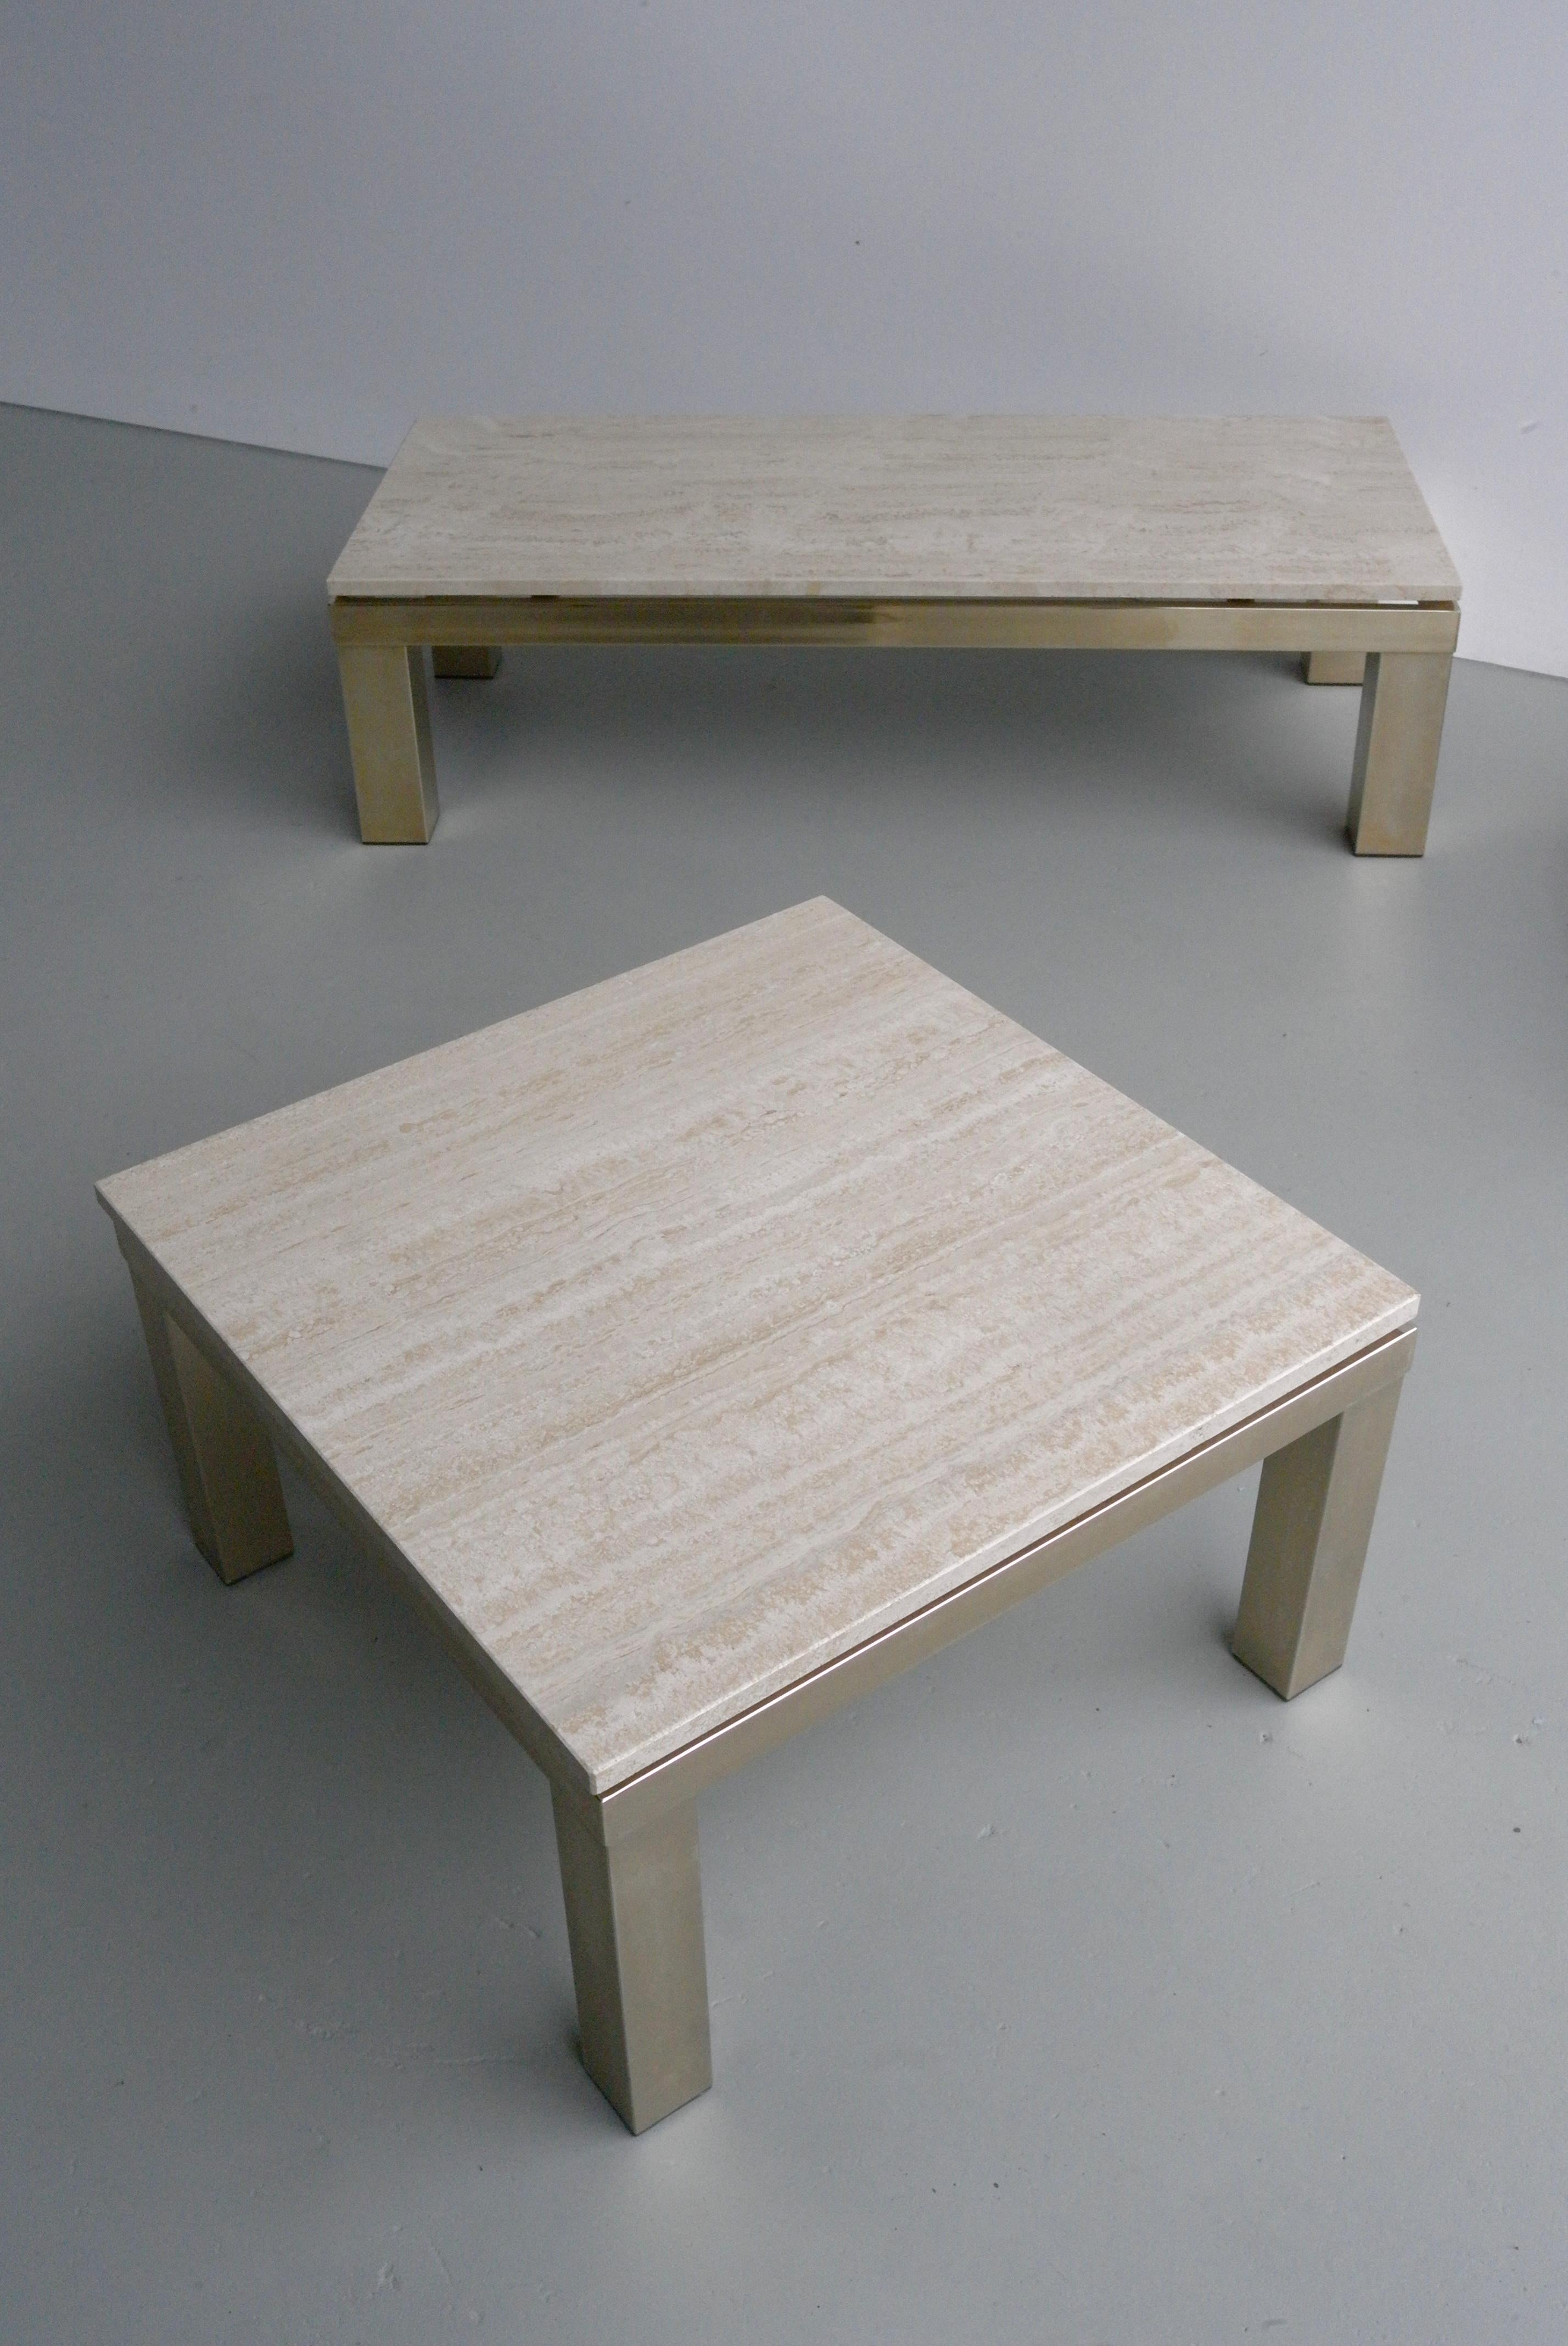 Coffee table and side tables, Travertine, Gold-Plated 23-Carat, by Belgo Chrome 4